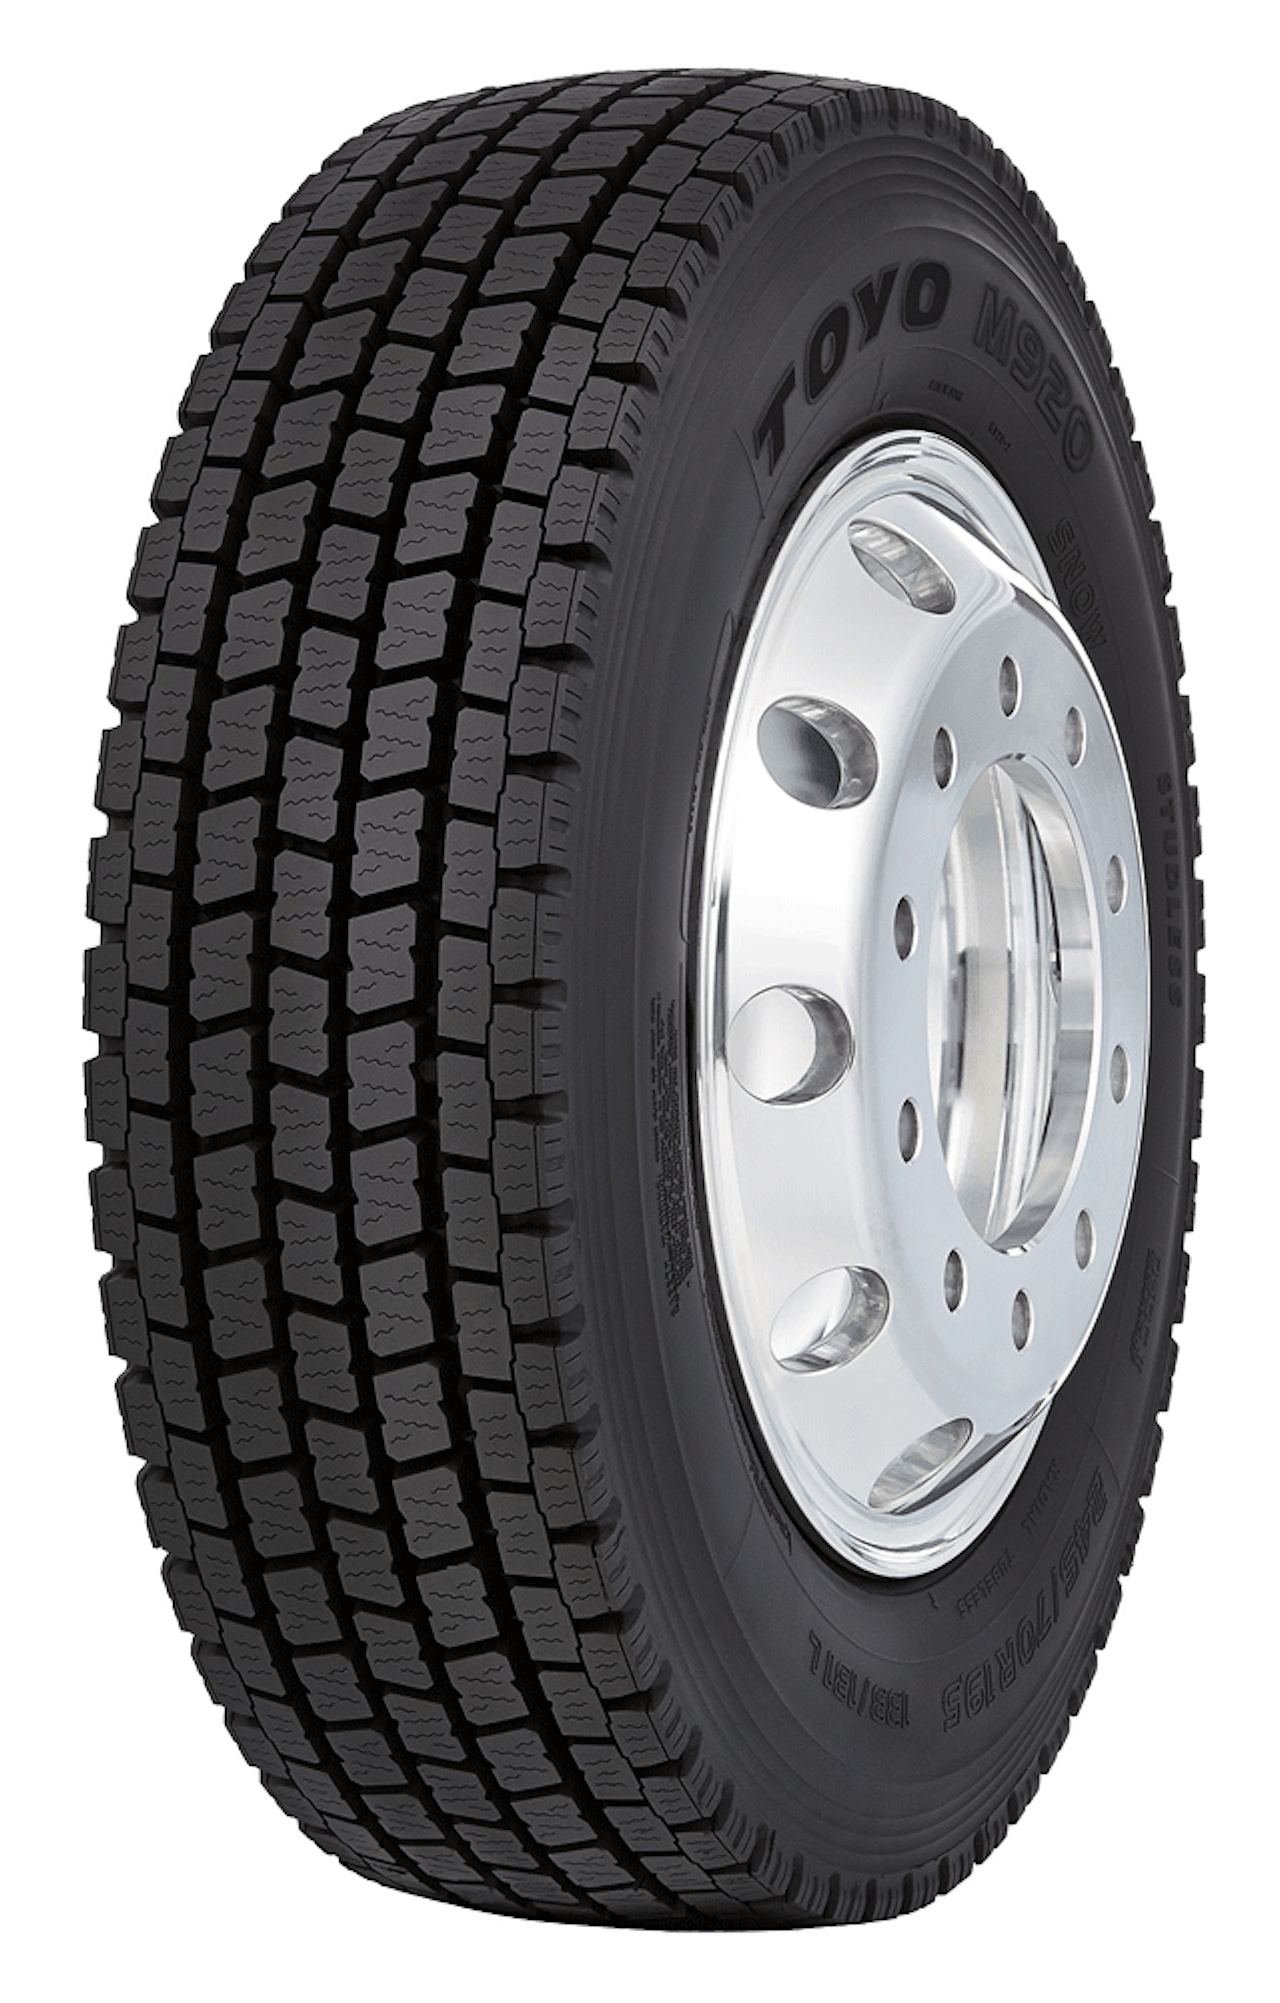 toyo-tires-expands-commercial-tire-product-line-trucks-parts-service